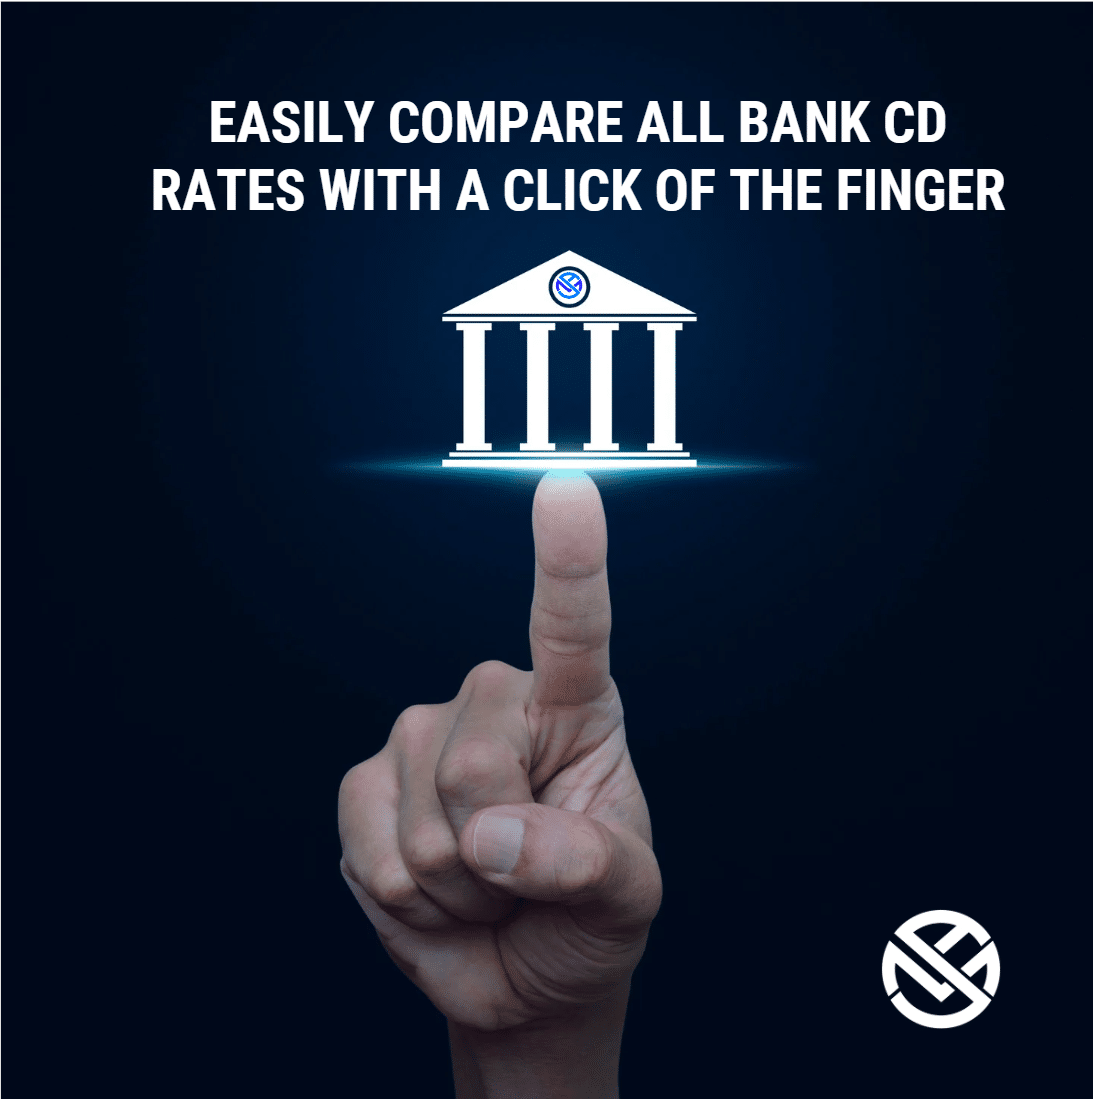 White bank icon resting on top of index finger with text "easily compare all bank cd rates with a click of the finger"